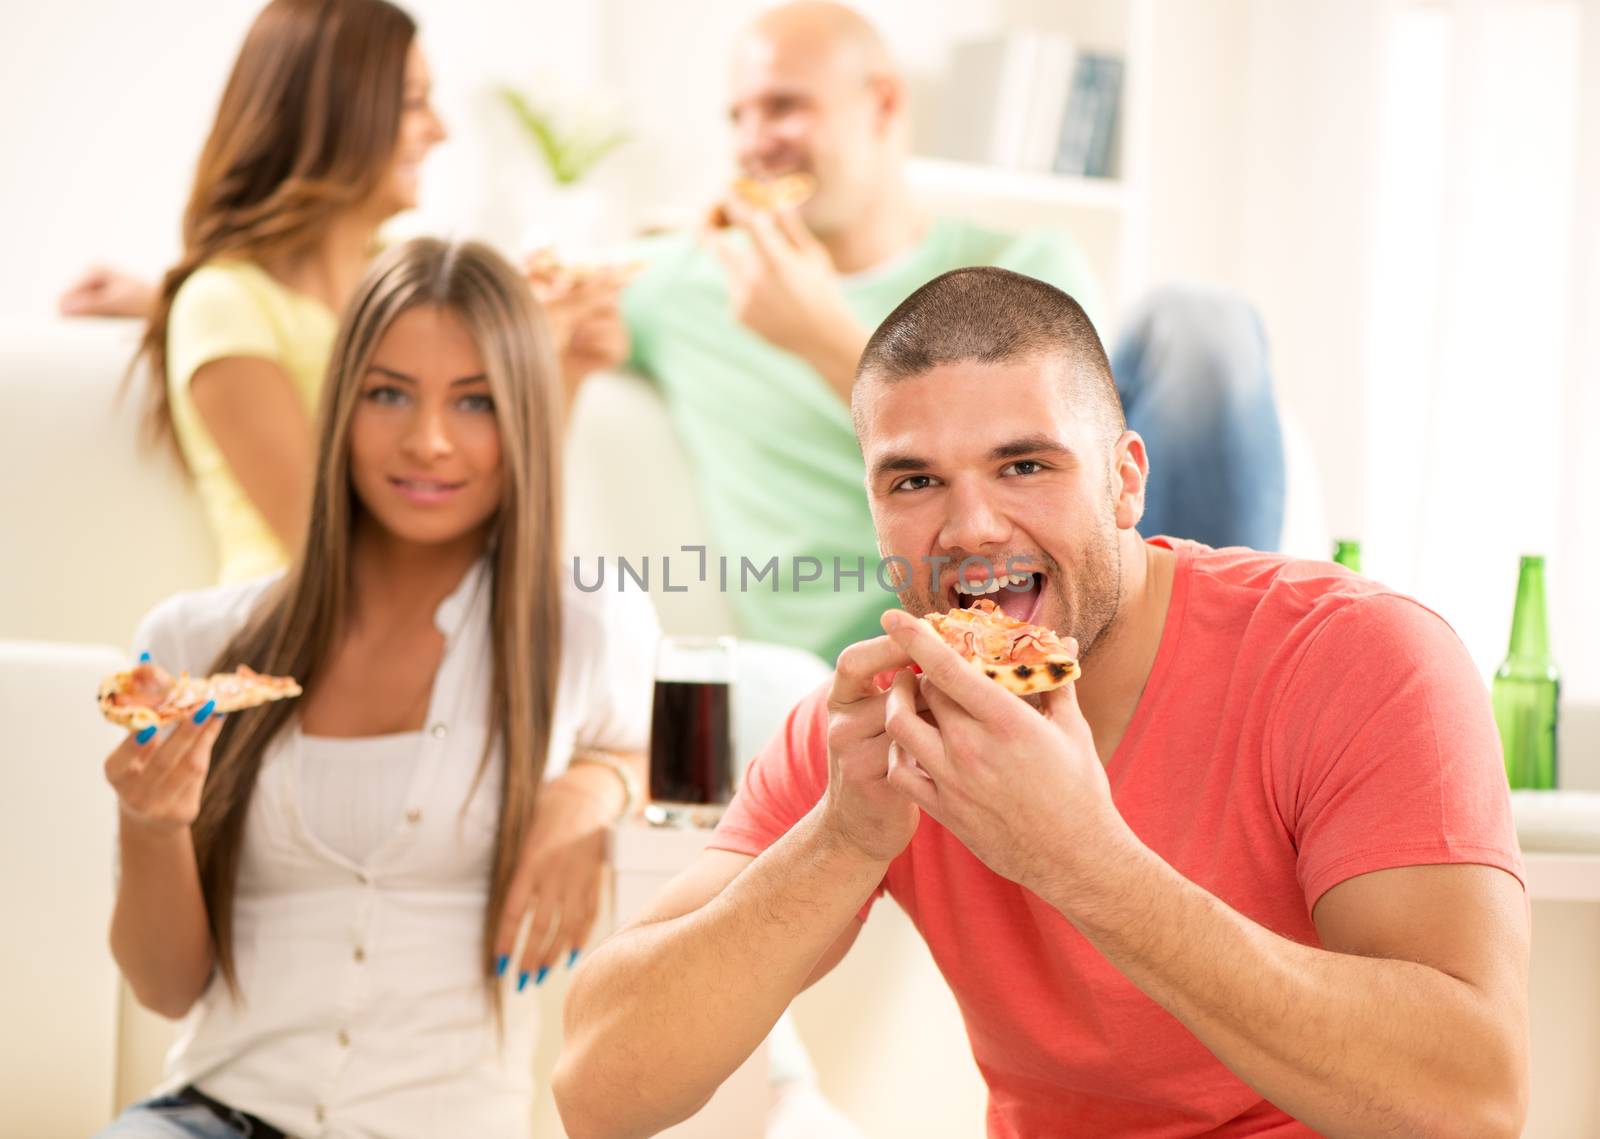 Close up of a young men smiling and eating pizza with her friends in the background.